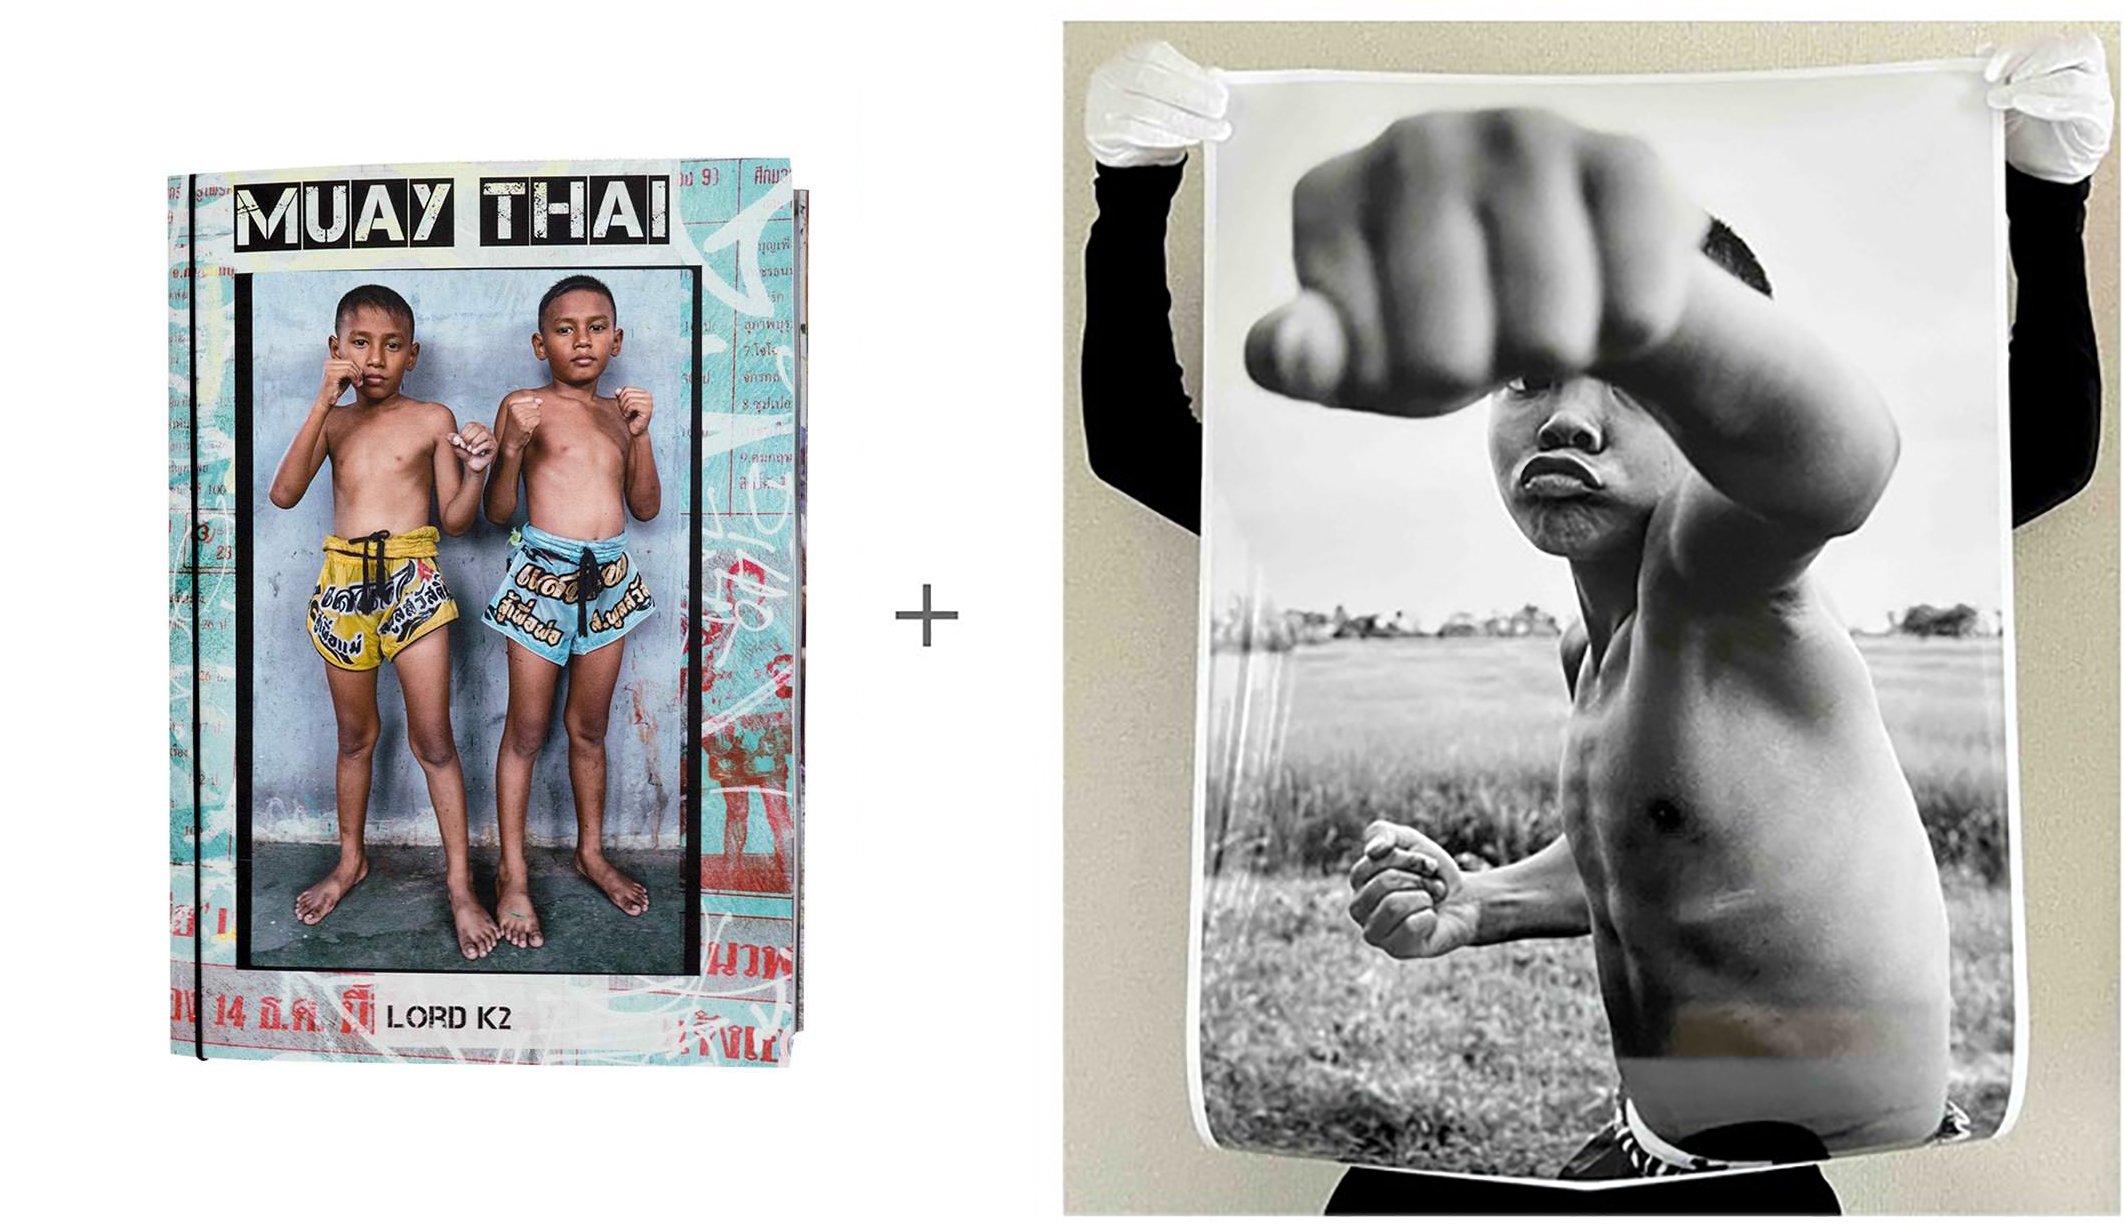 Signed Book 'Muay Thai' + Signed Print 'Pupa' | €325.00